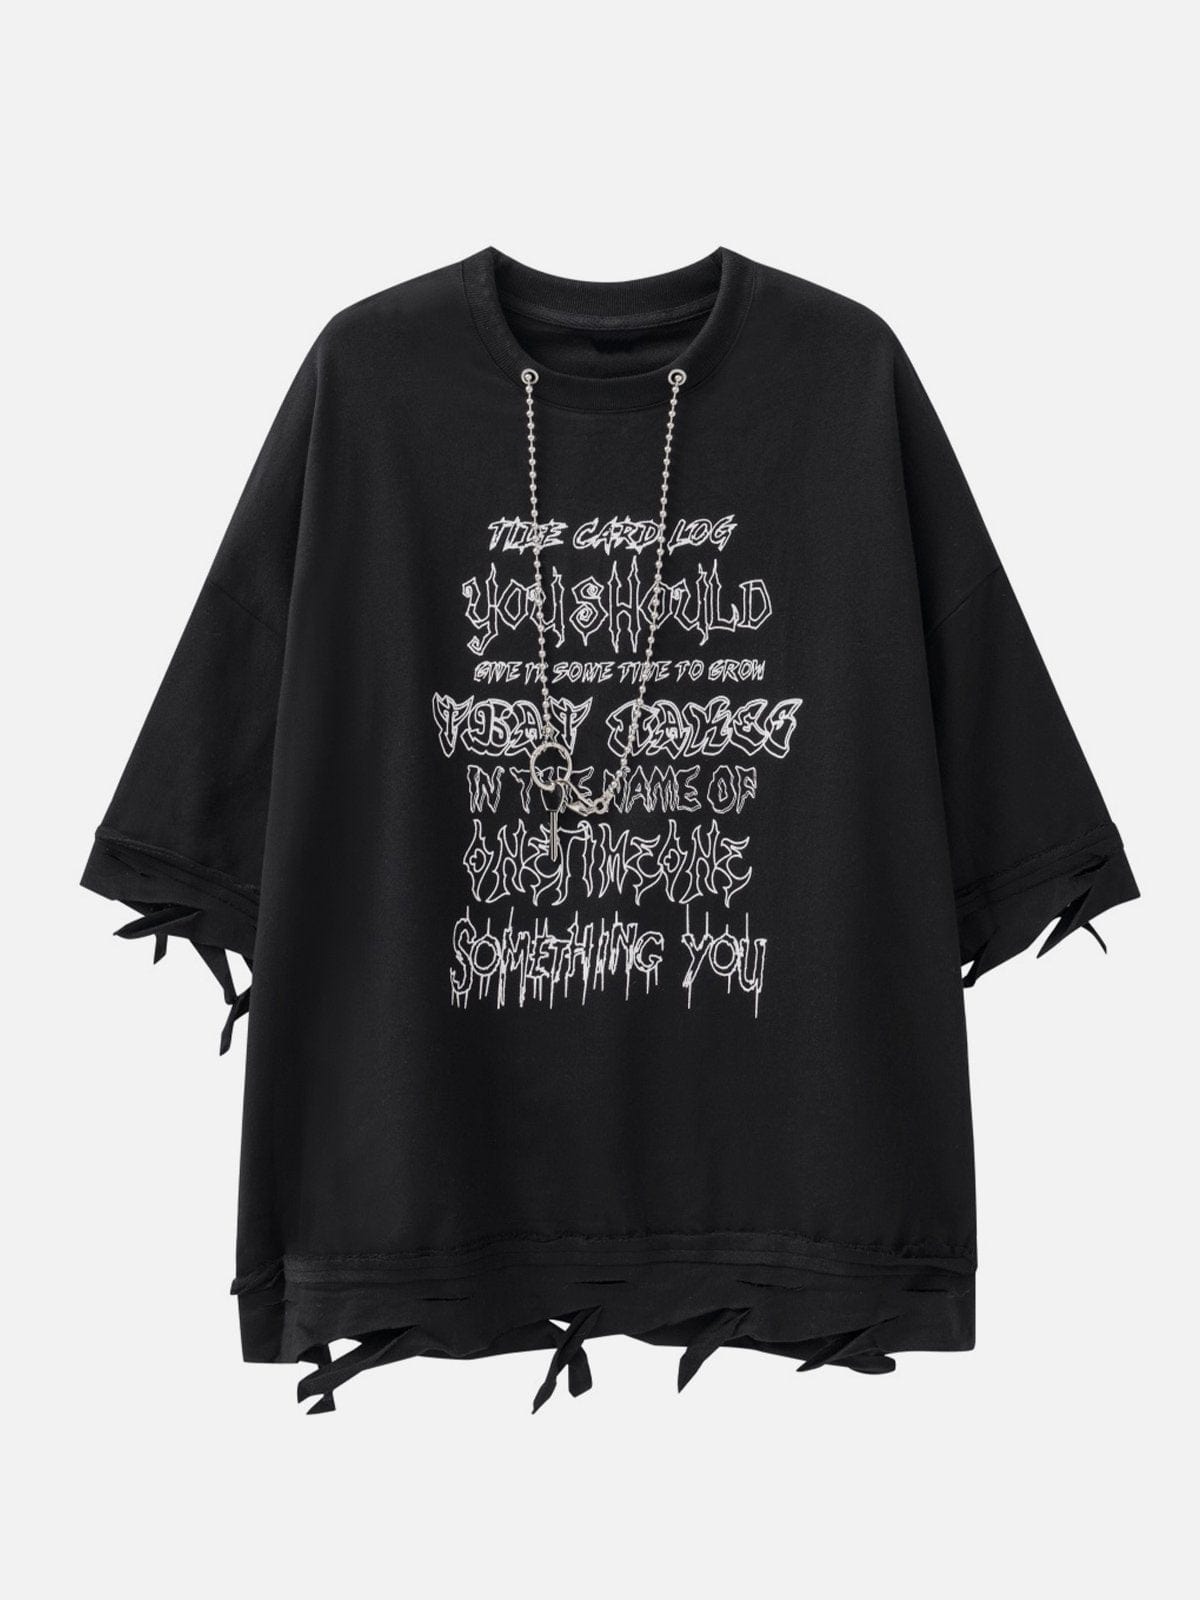 NEV Chain Decoration Distressed Tee